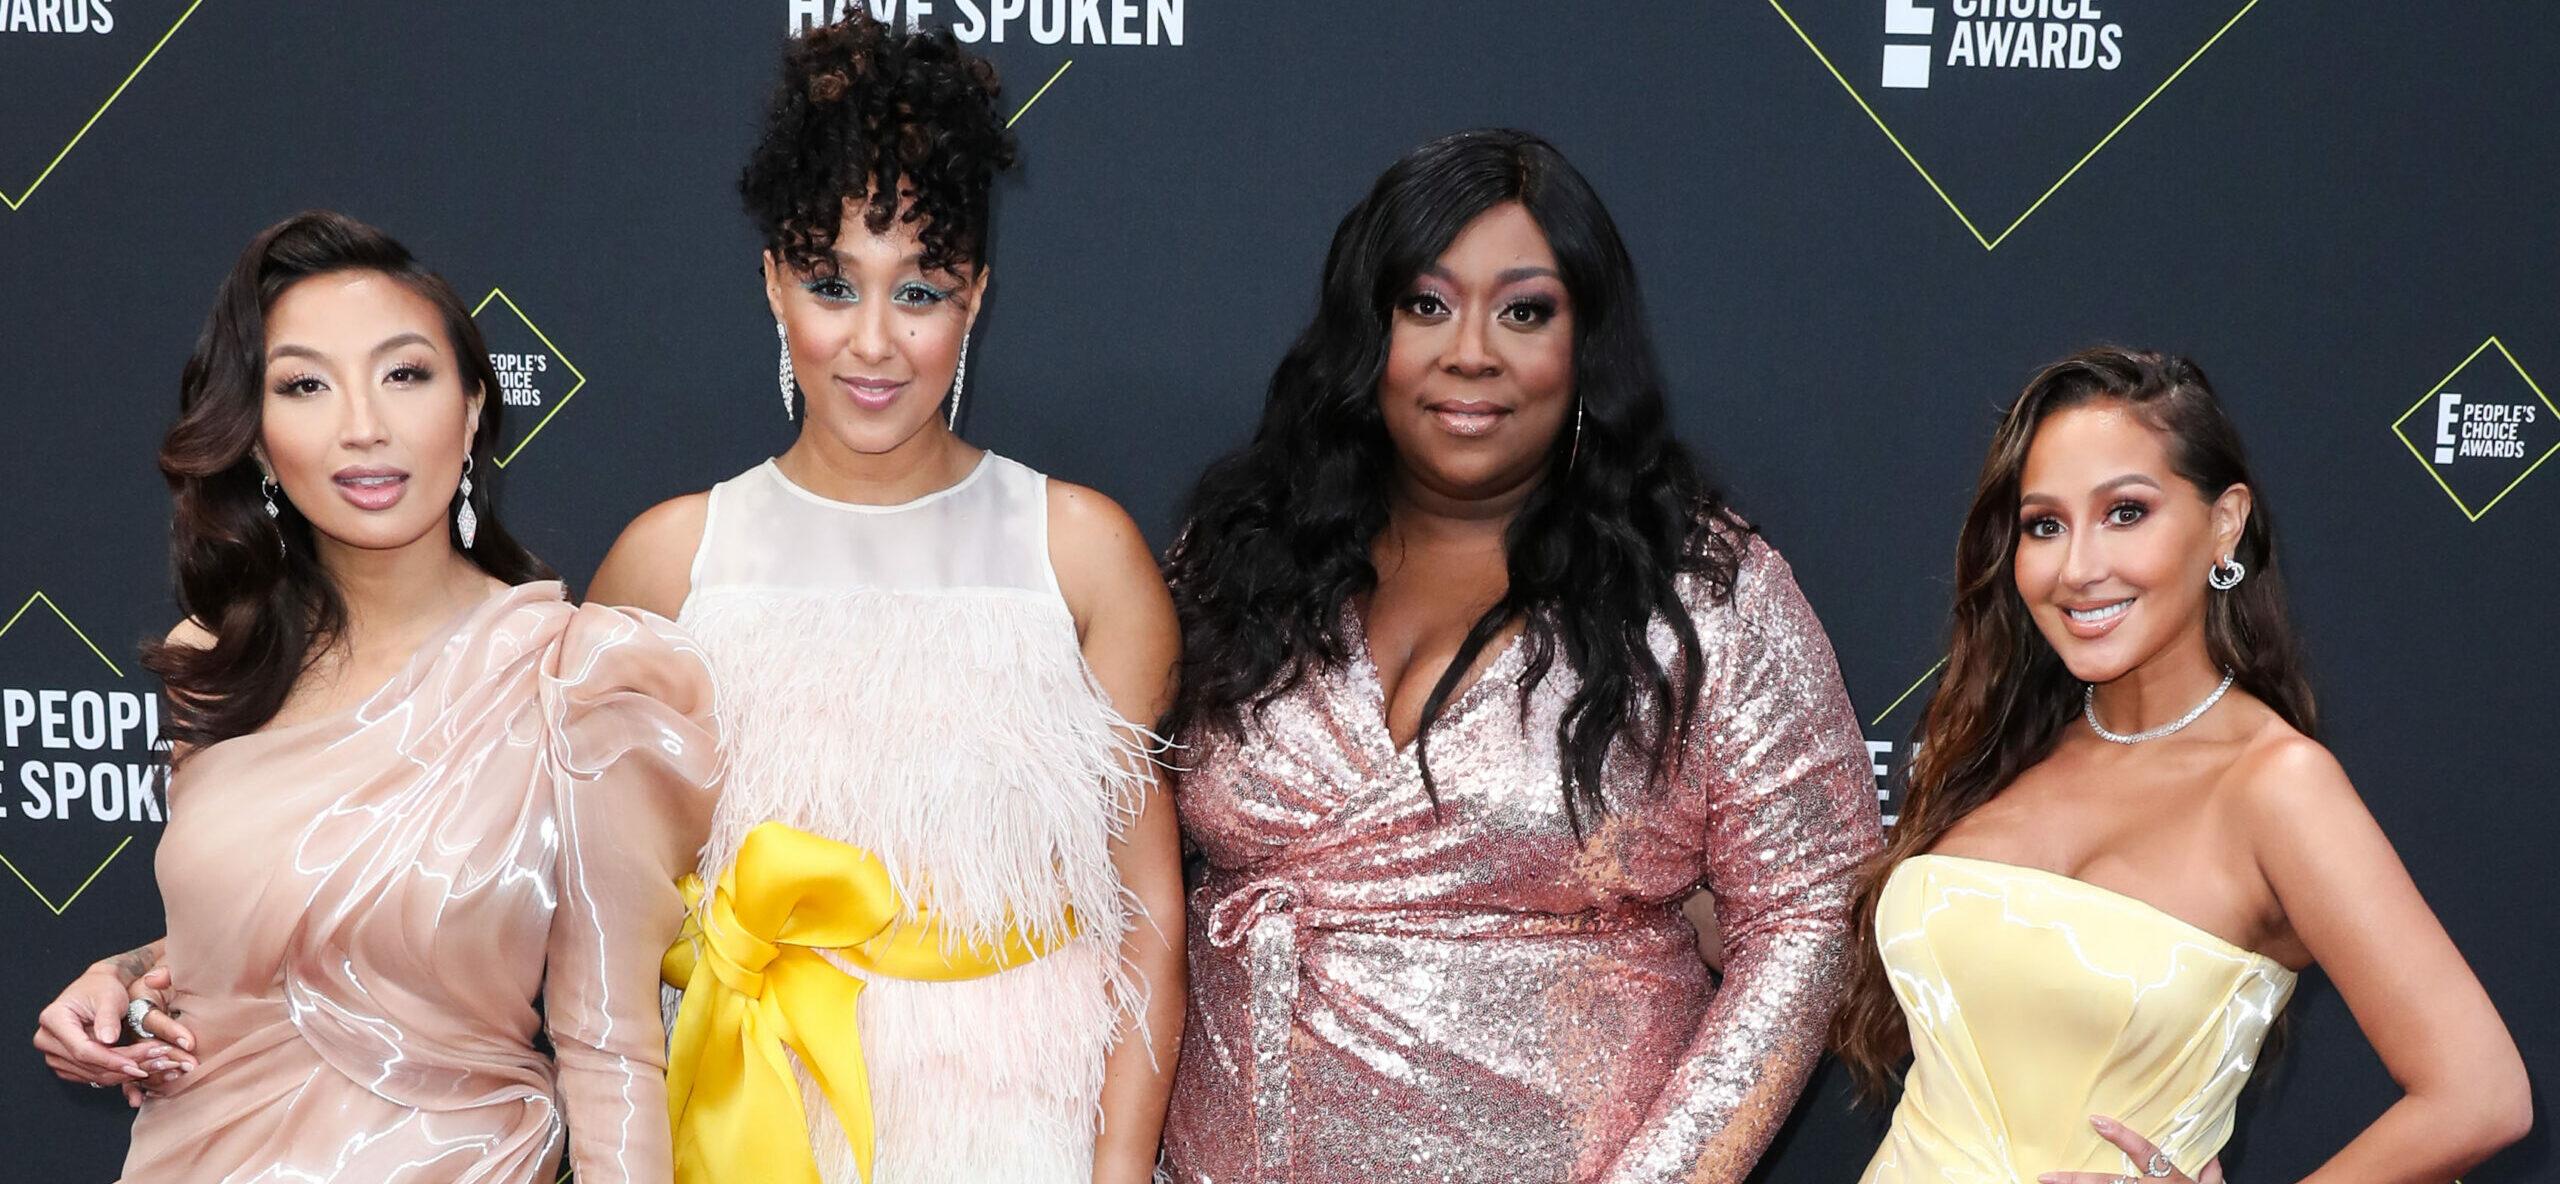 Hosts of "The Real" Jeannie Mai, Tamera Mowry-Housley, Loni Love, Adrienne Bailon Houghton at the 2019 E! People's Choice Awards